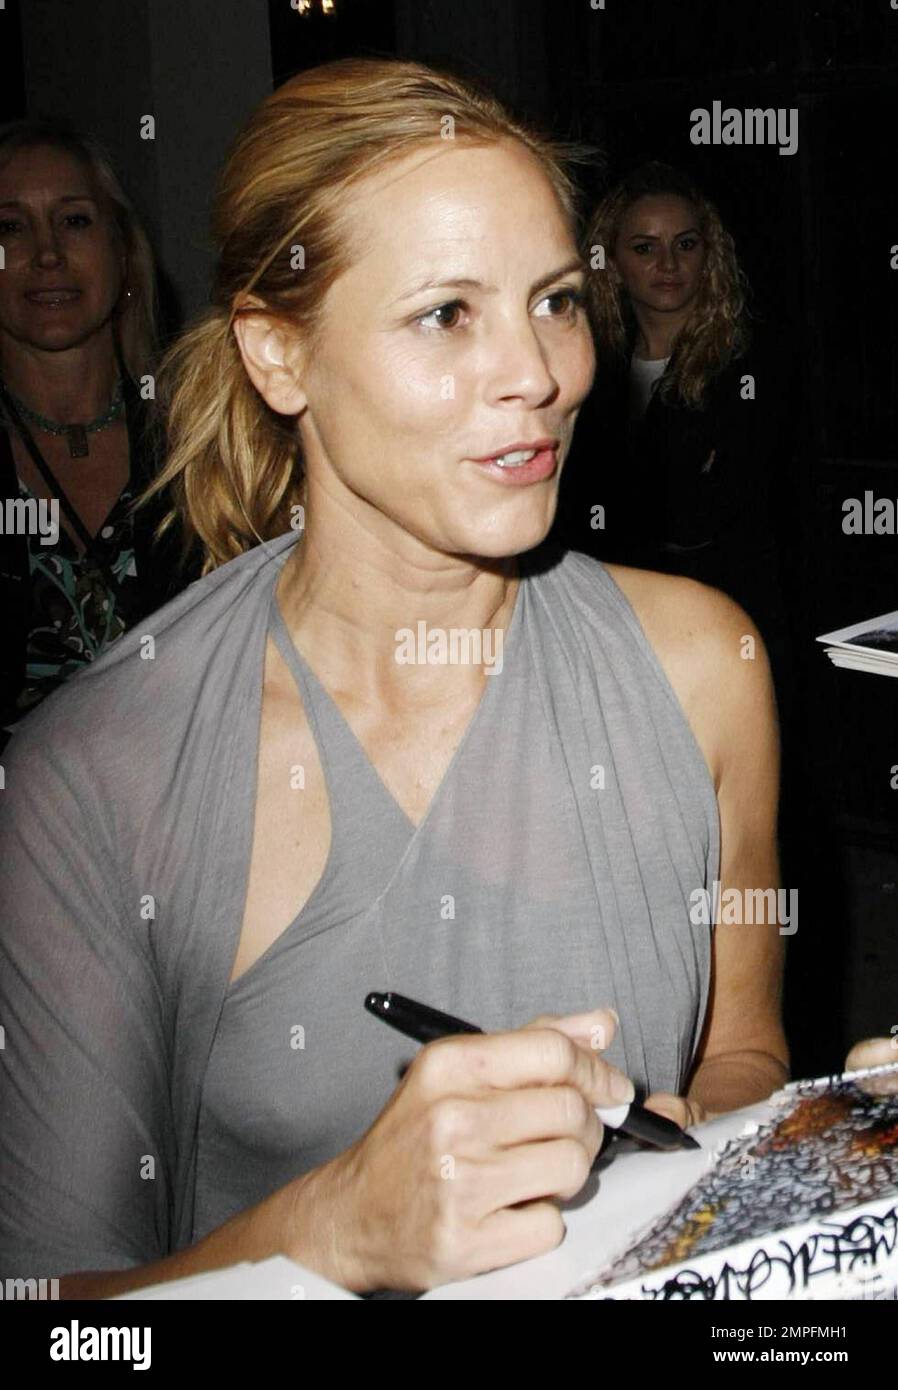 Maria Bello wears a grey slinky dress and appears to go braless